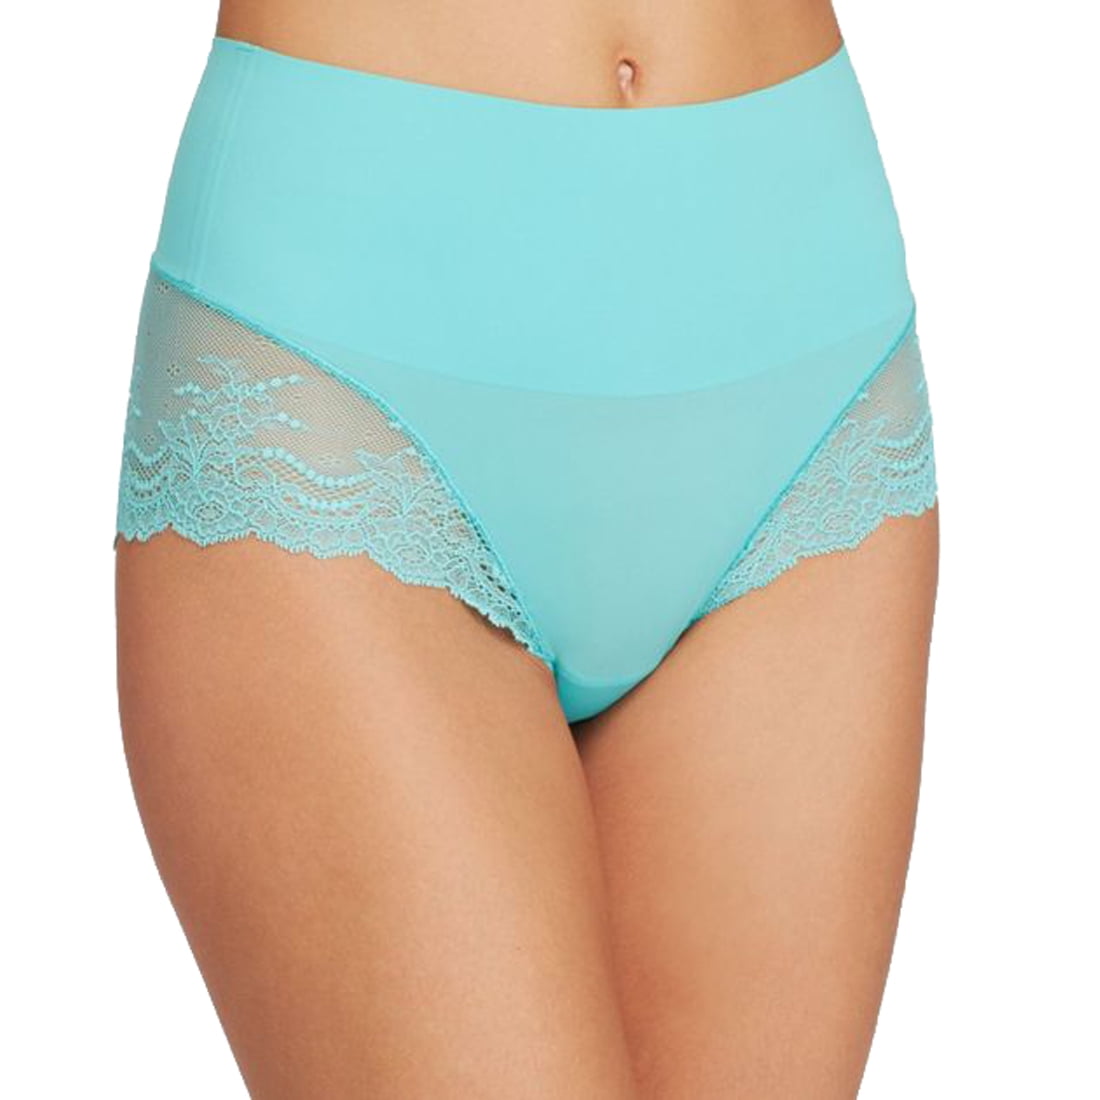 Spanx Undie-tectable Lace Hi-Hipster Panty, SP0515, Turkish Mint